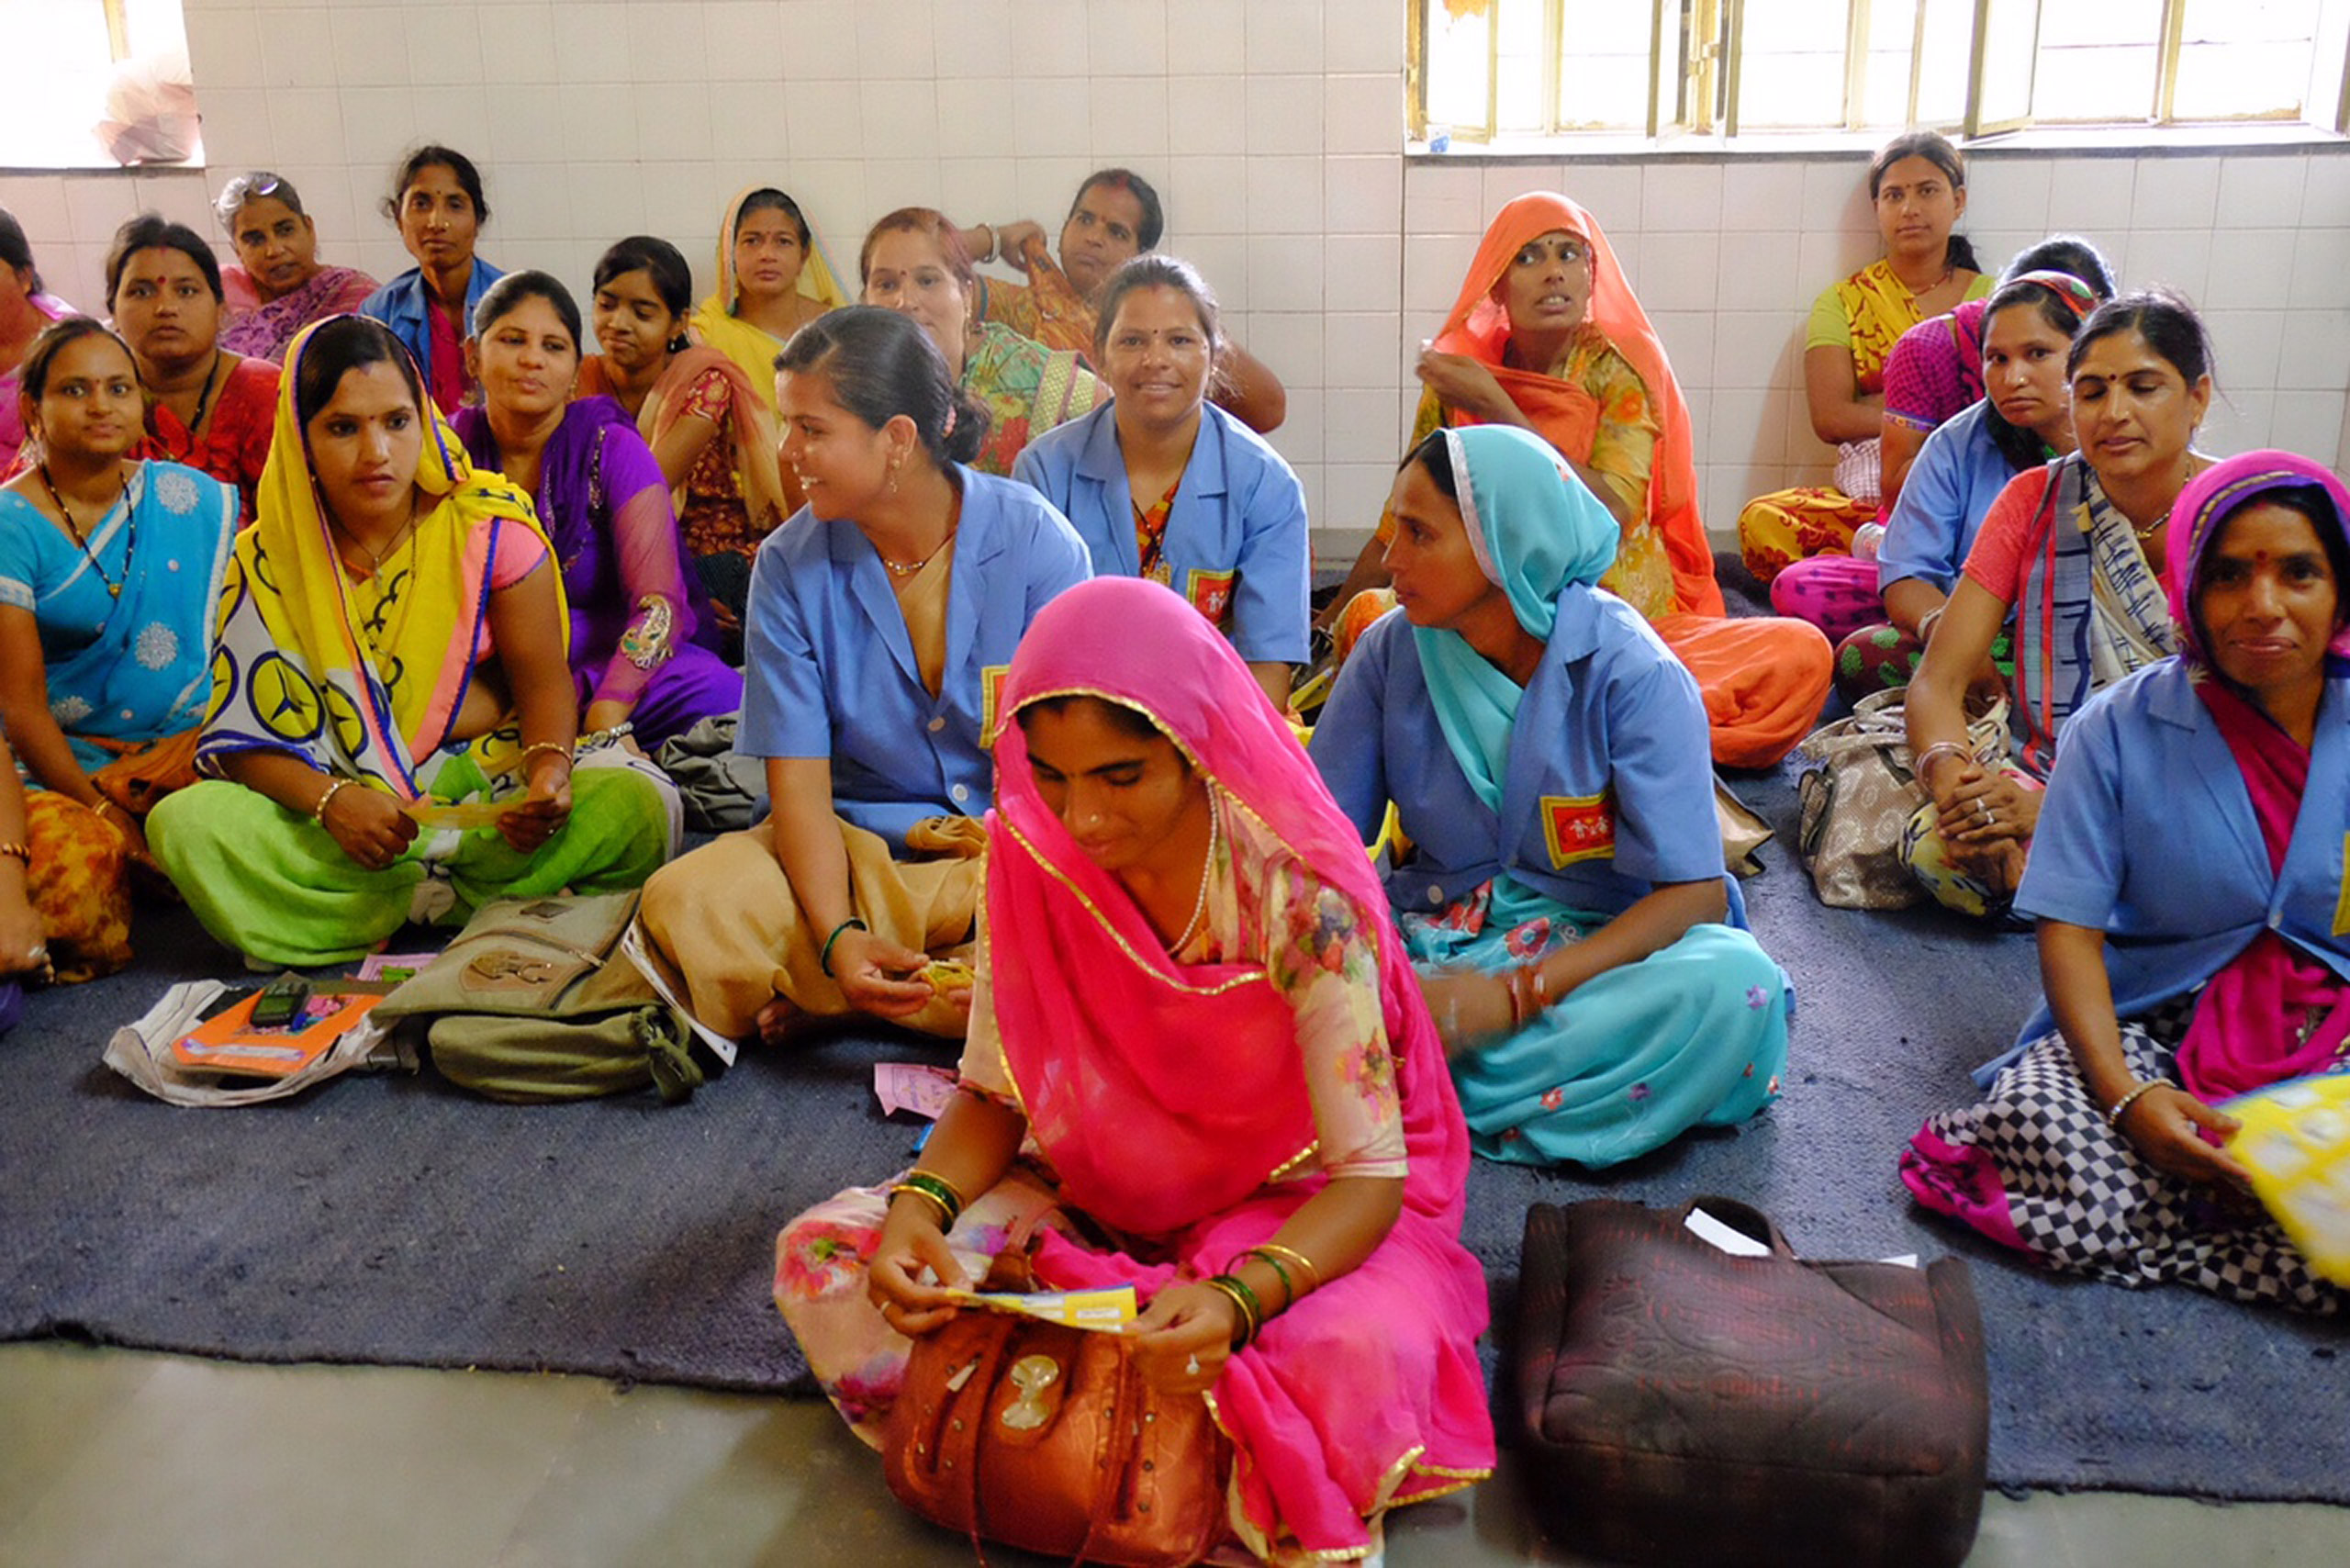 Ashas (community health workers) and midwives in rural Rajasthan receive training from Ipas in counseling about reproductive health options, including abortion. (Jill Filipovic)